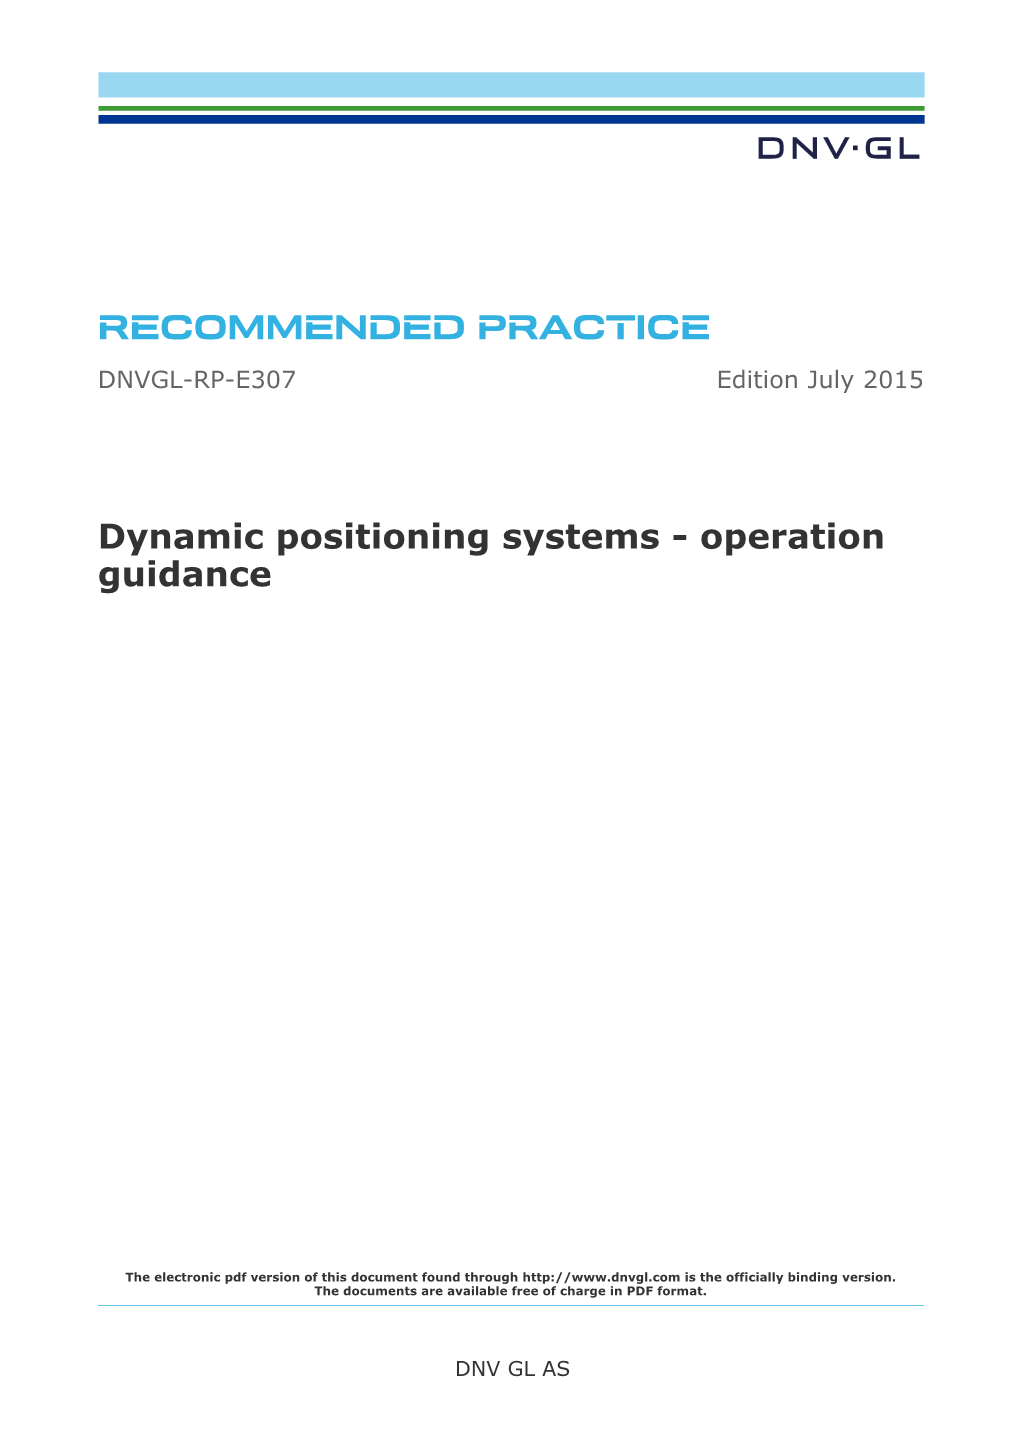 DNVGL-RP-E307: Dynamic Positioning Systems